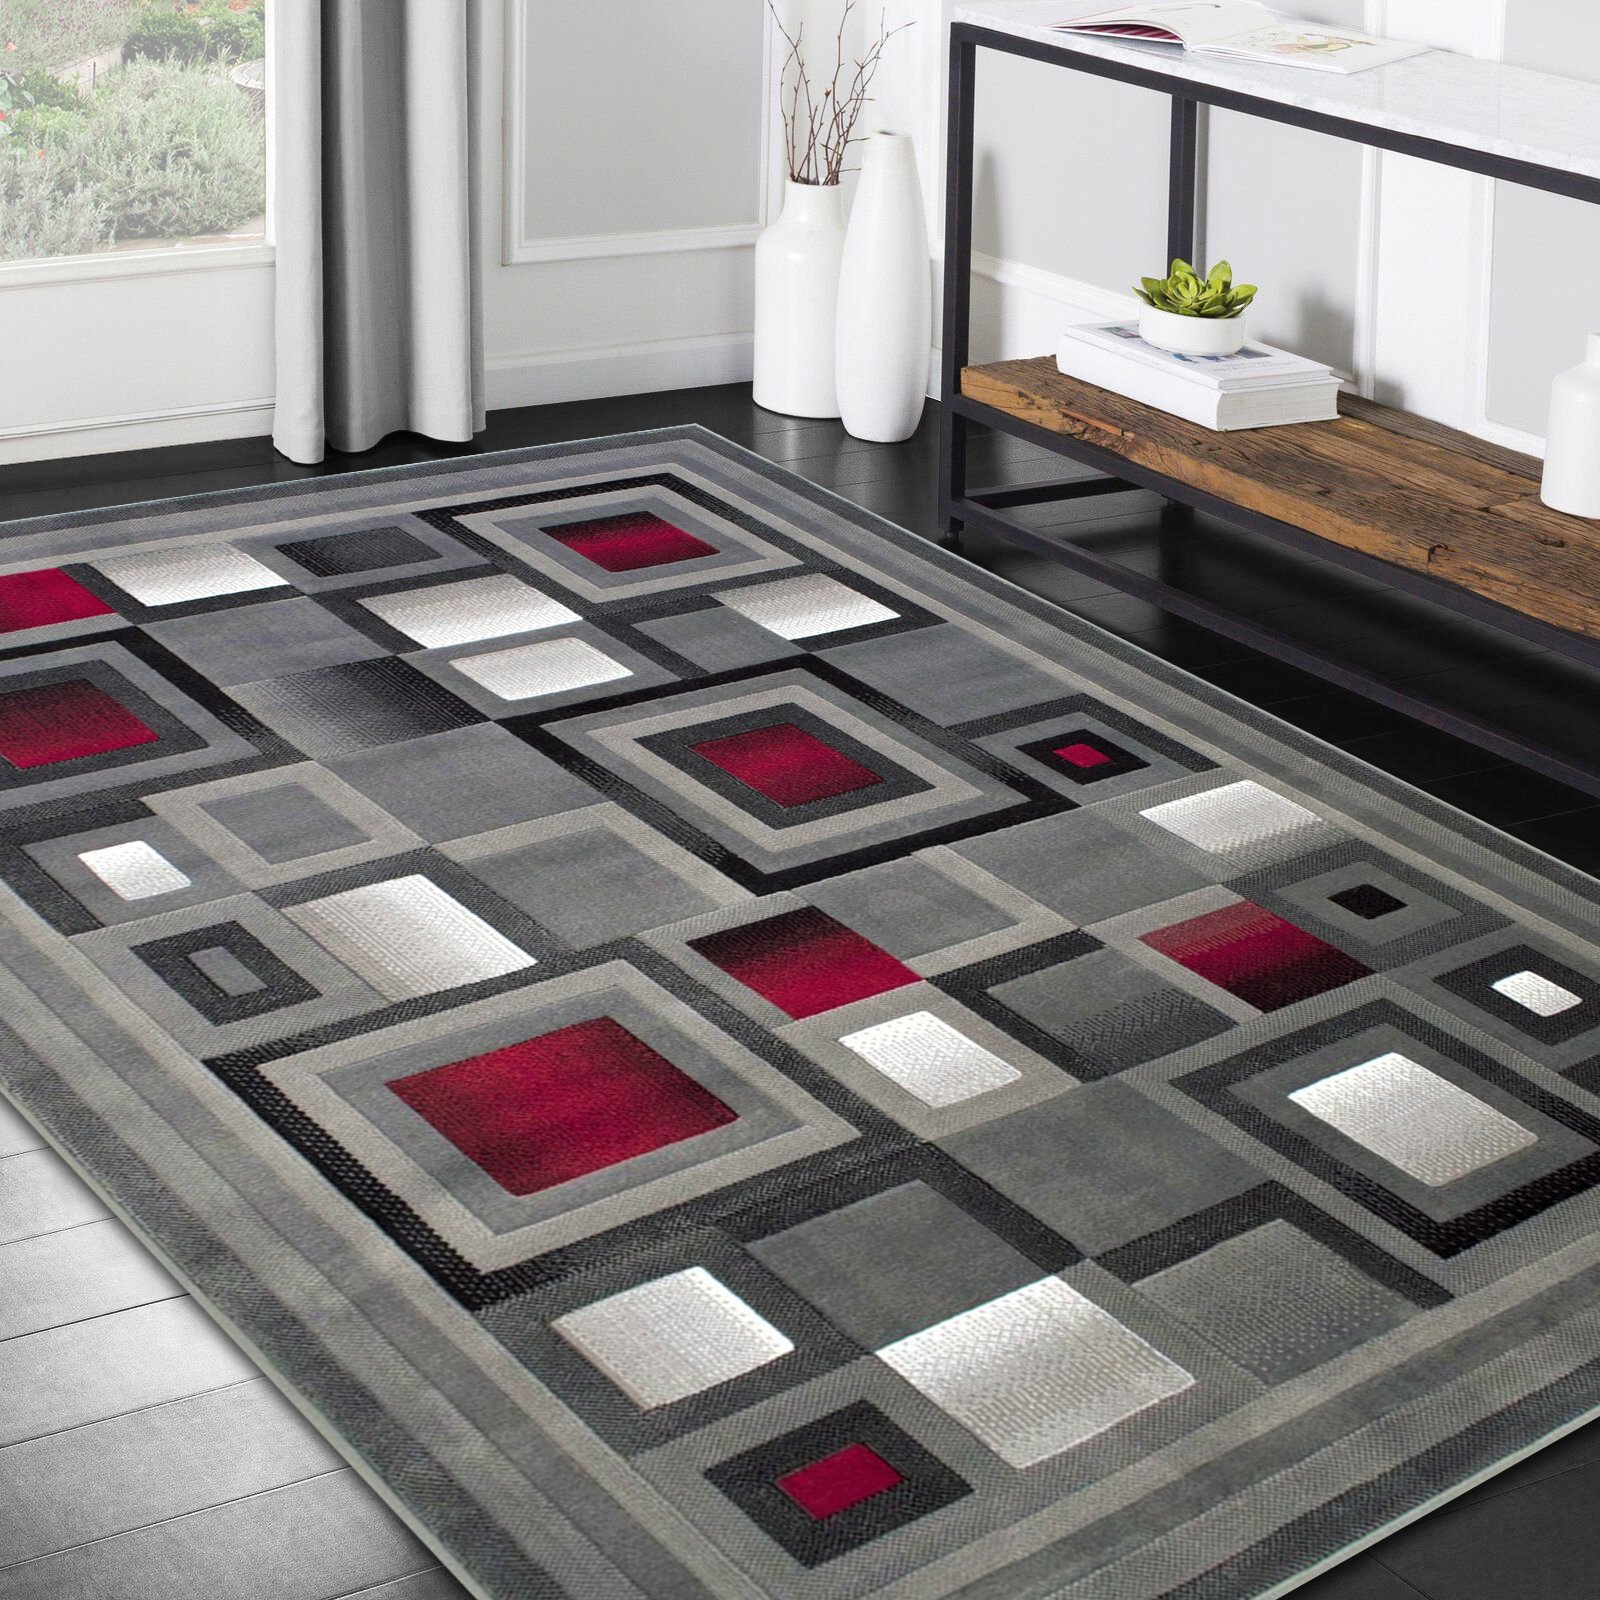 Handcraft Rugs Red Lava/Silver/Gray Abstract Geometric Modern Squares  Pattern Area Rug 8 ft. by 10 ft. - Walmart.com